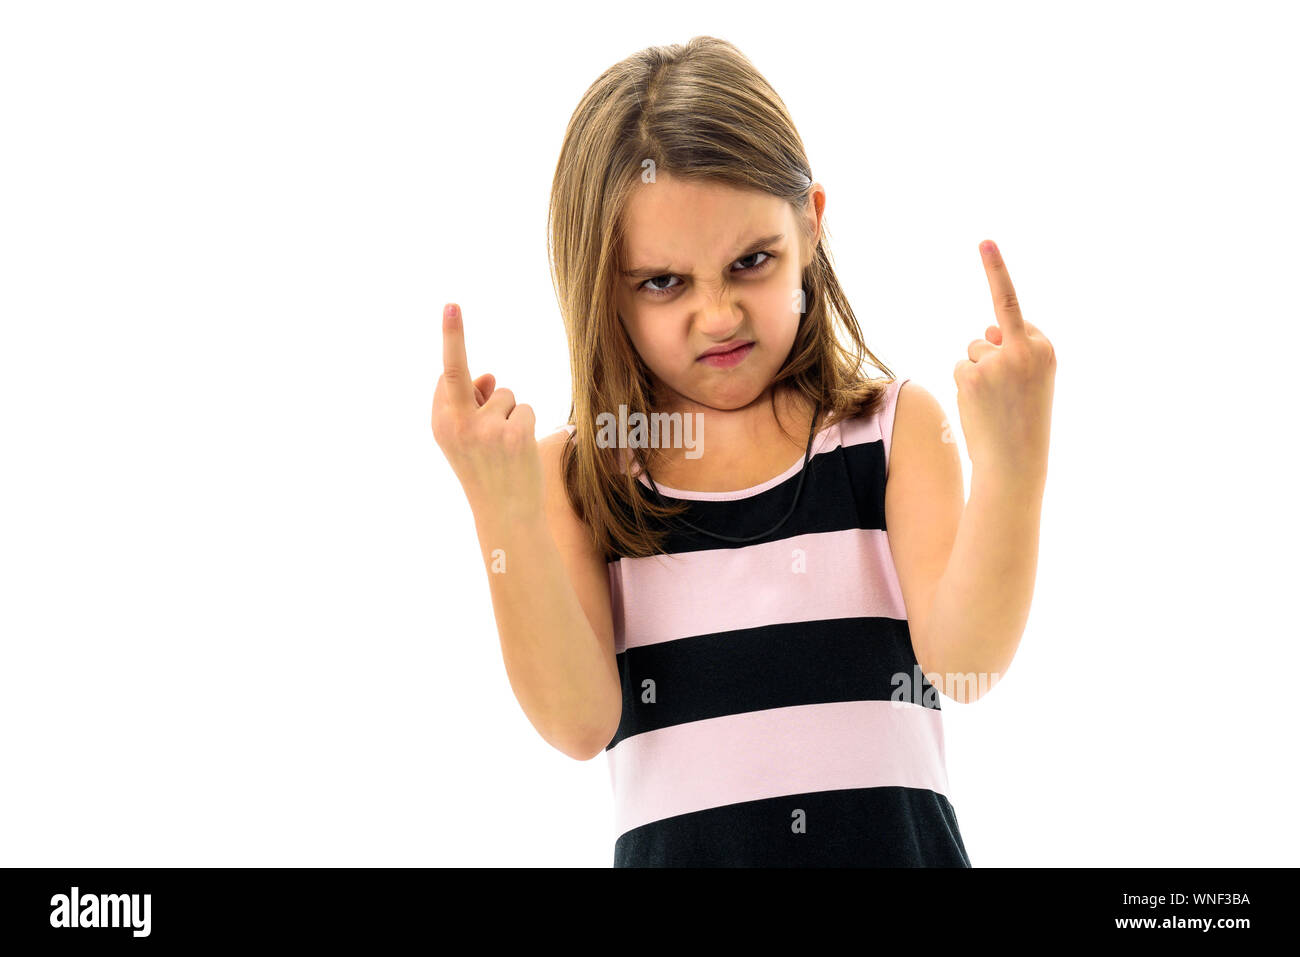 portrait-von-angry-girl-obszone-geste-be